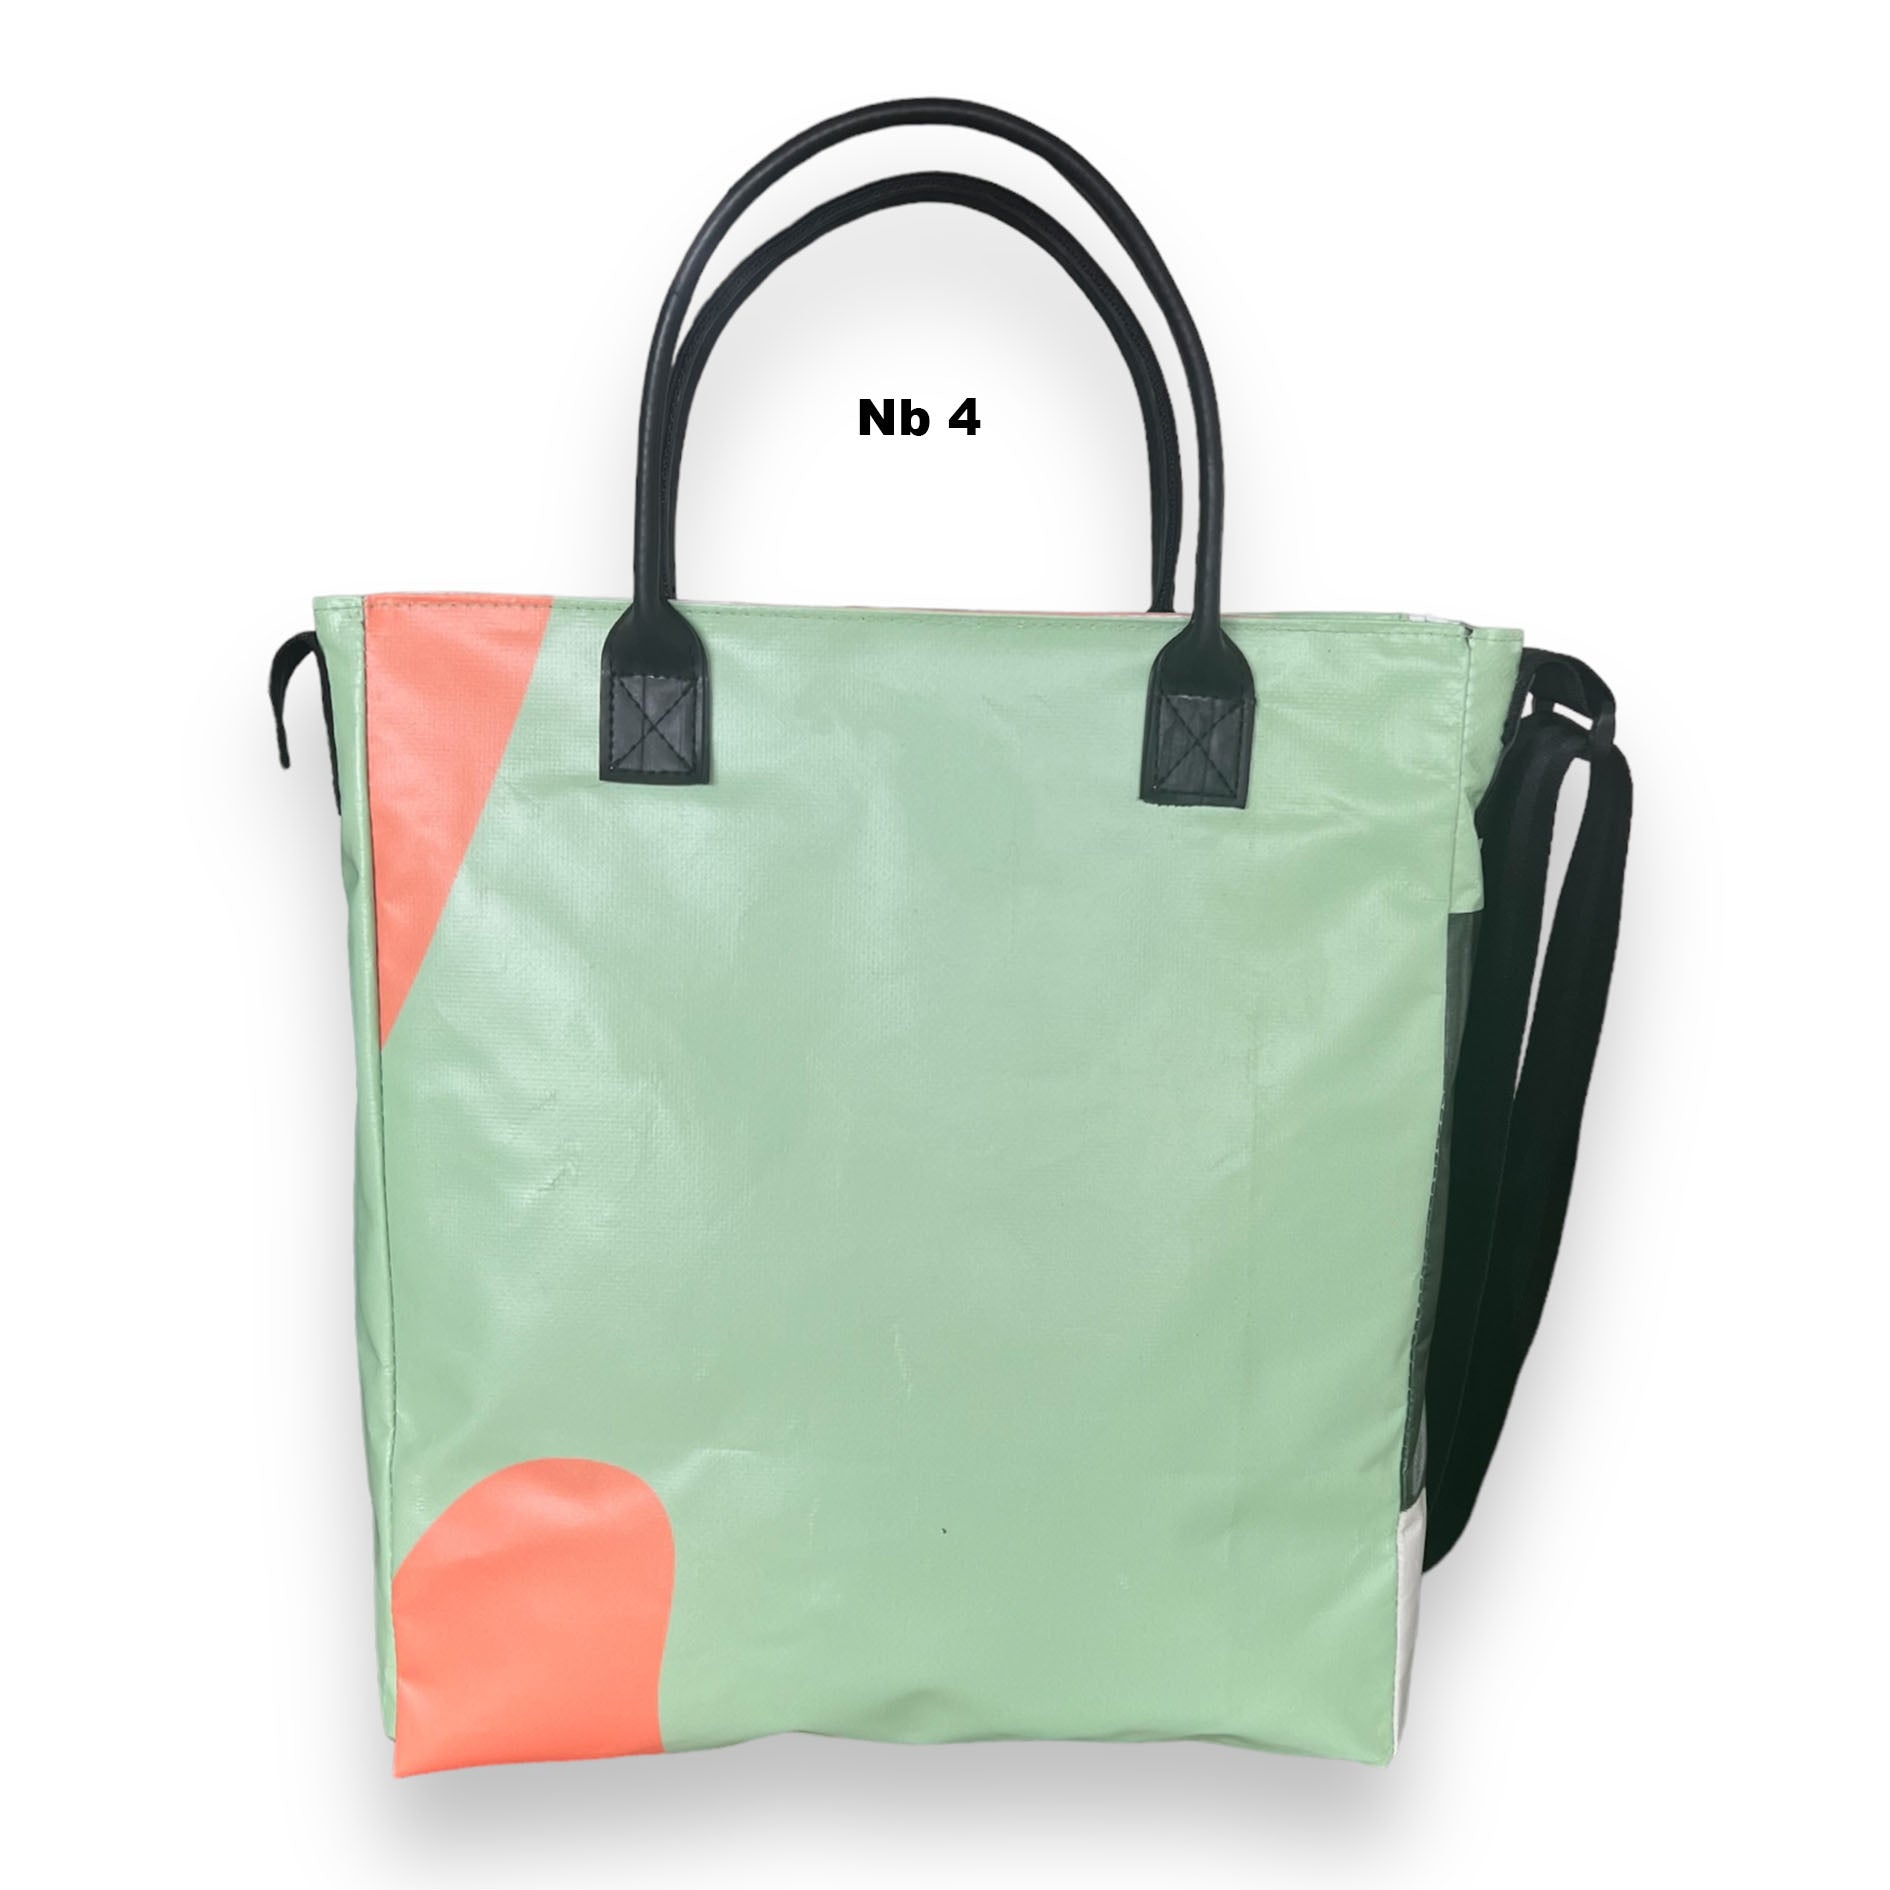 Upcycled materiał bags, made from building banners, bags made from building banners